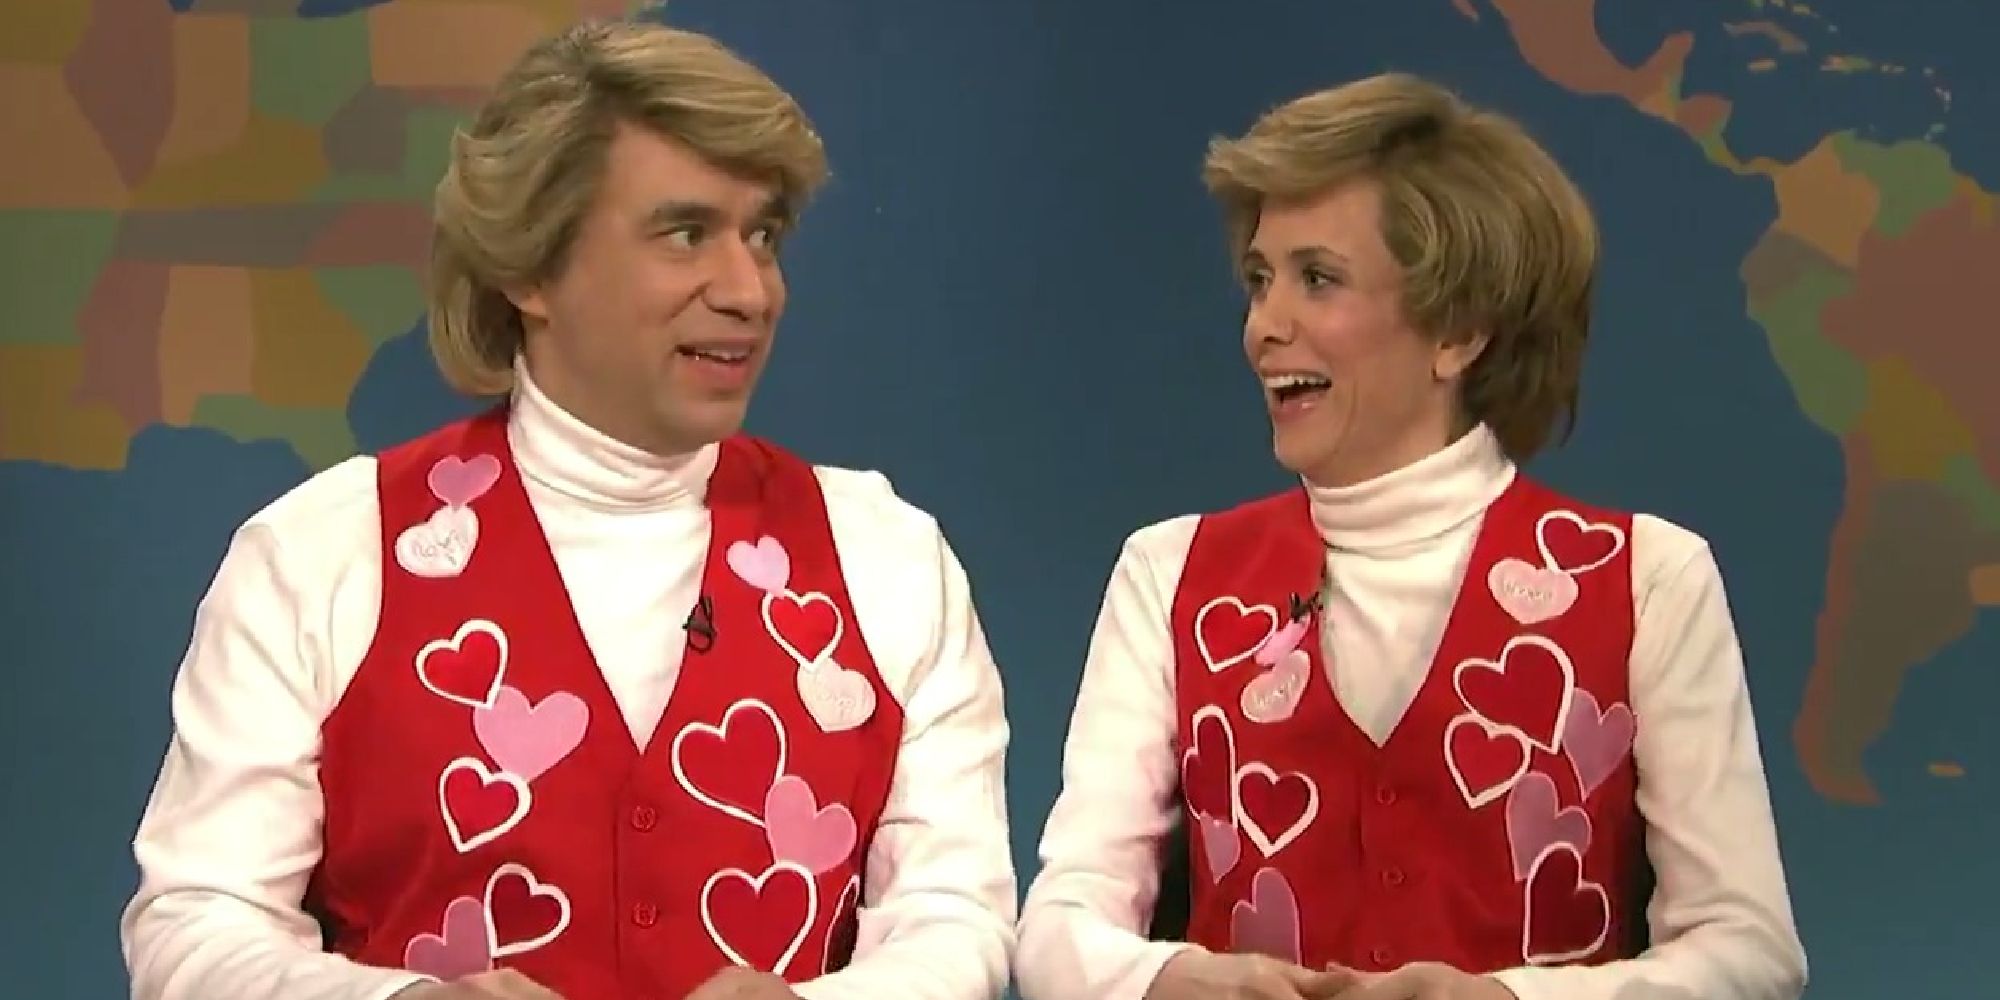 Garth and Kat improvising a Valentine's Day song on Weekend Update